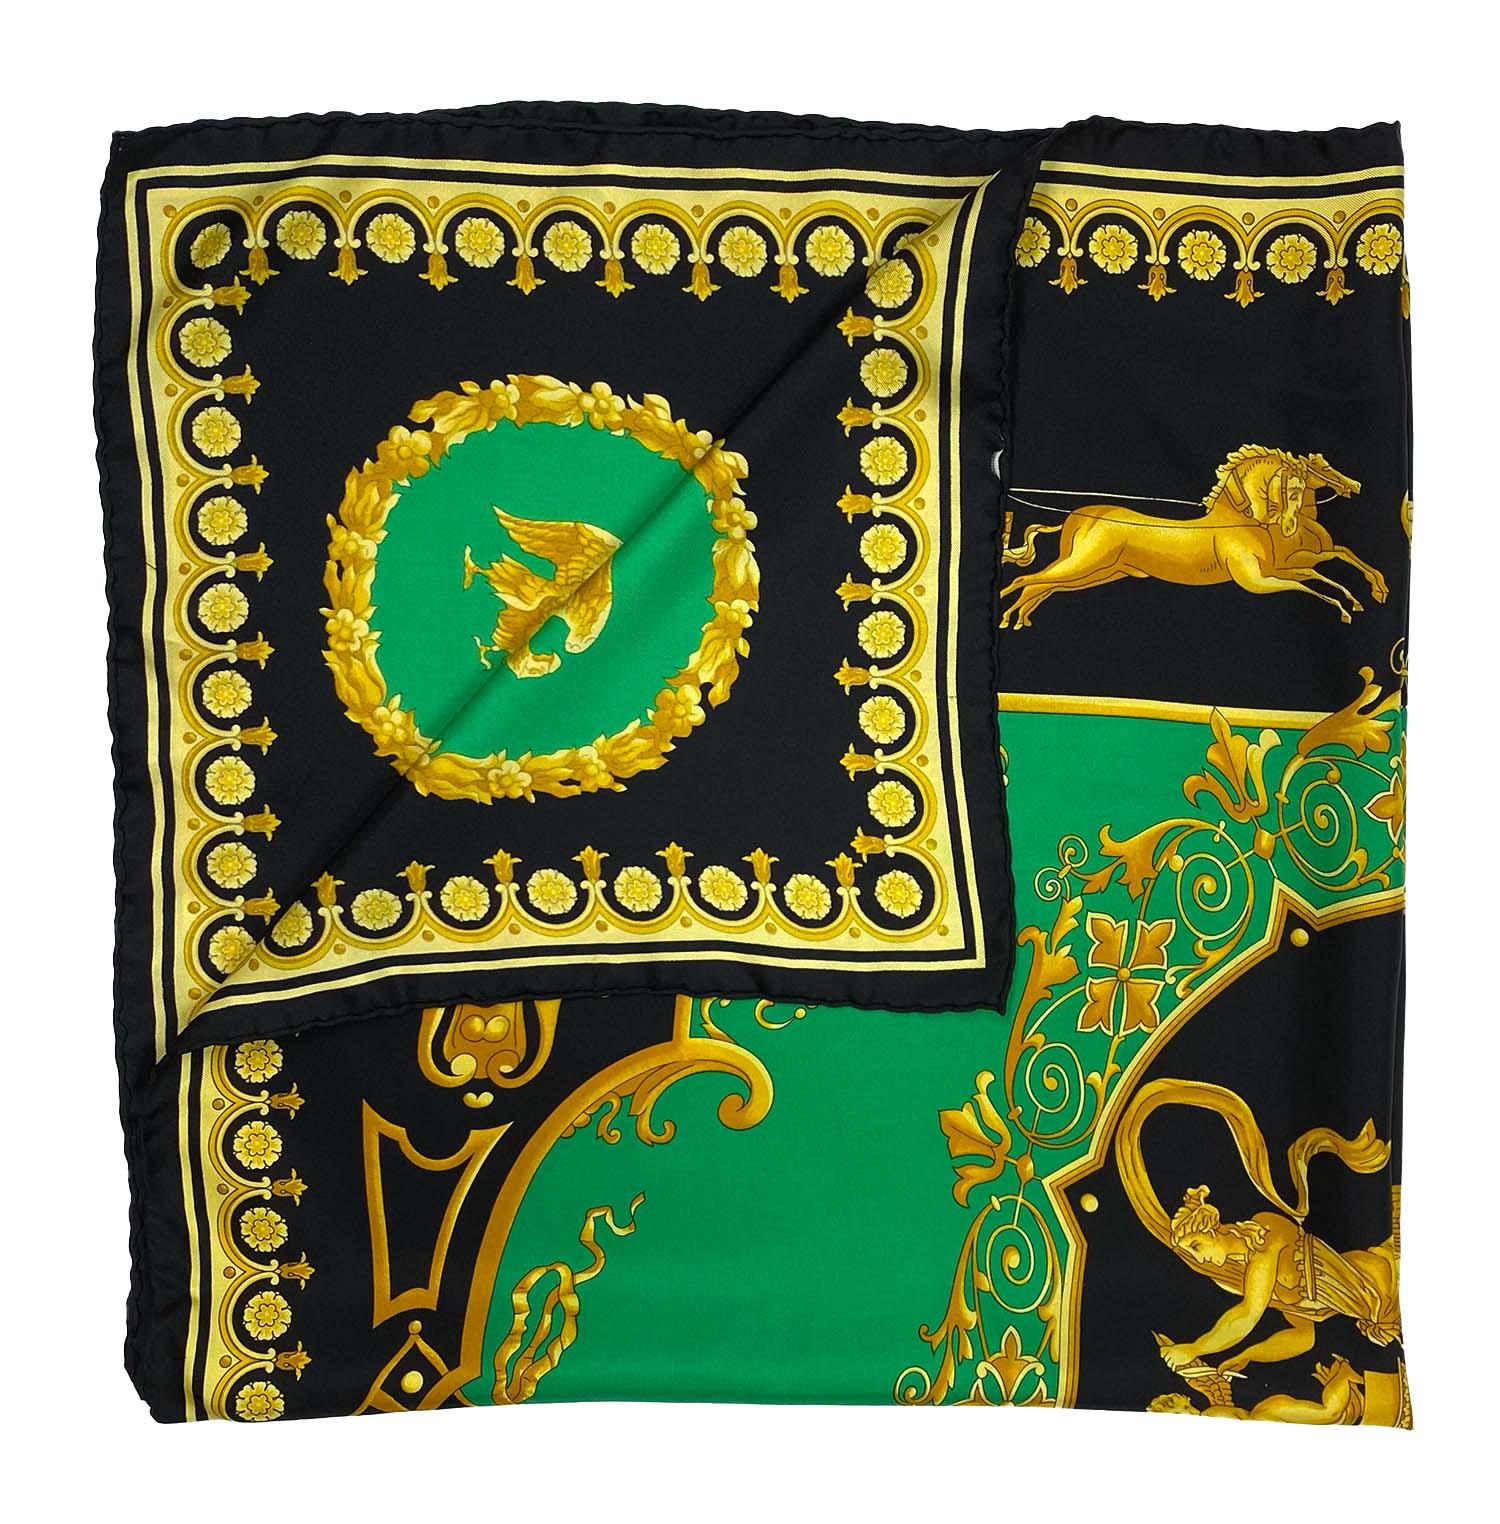 Presenting a beautiful baroque Atelier Versace square silk scarf, designed by Gianni Versace. This scarf features Roman/Greek mythological scenes surrounded on a bright green backdrop and floral baroque pattern.